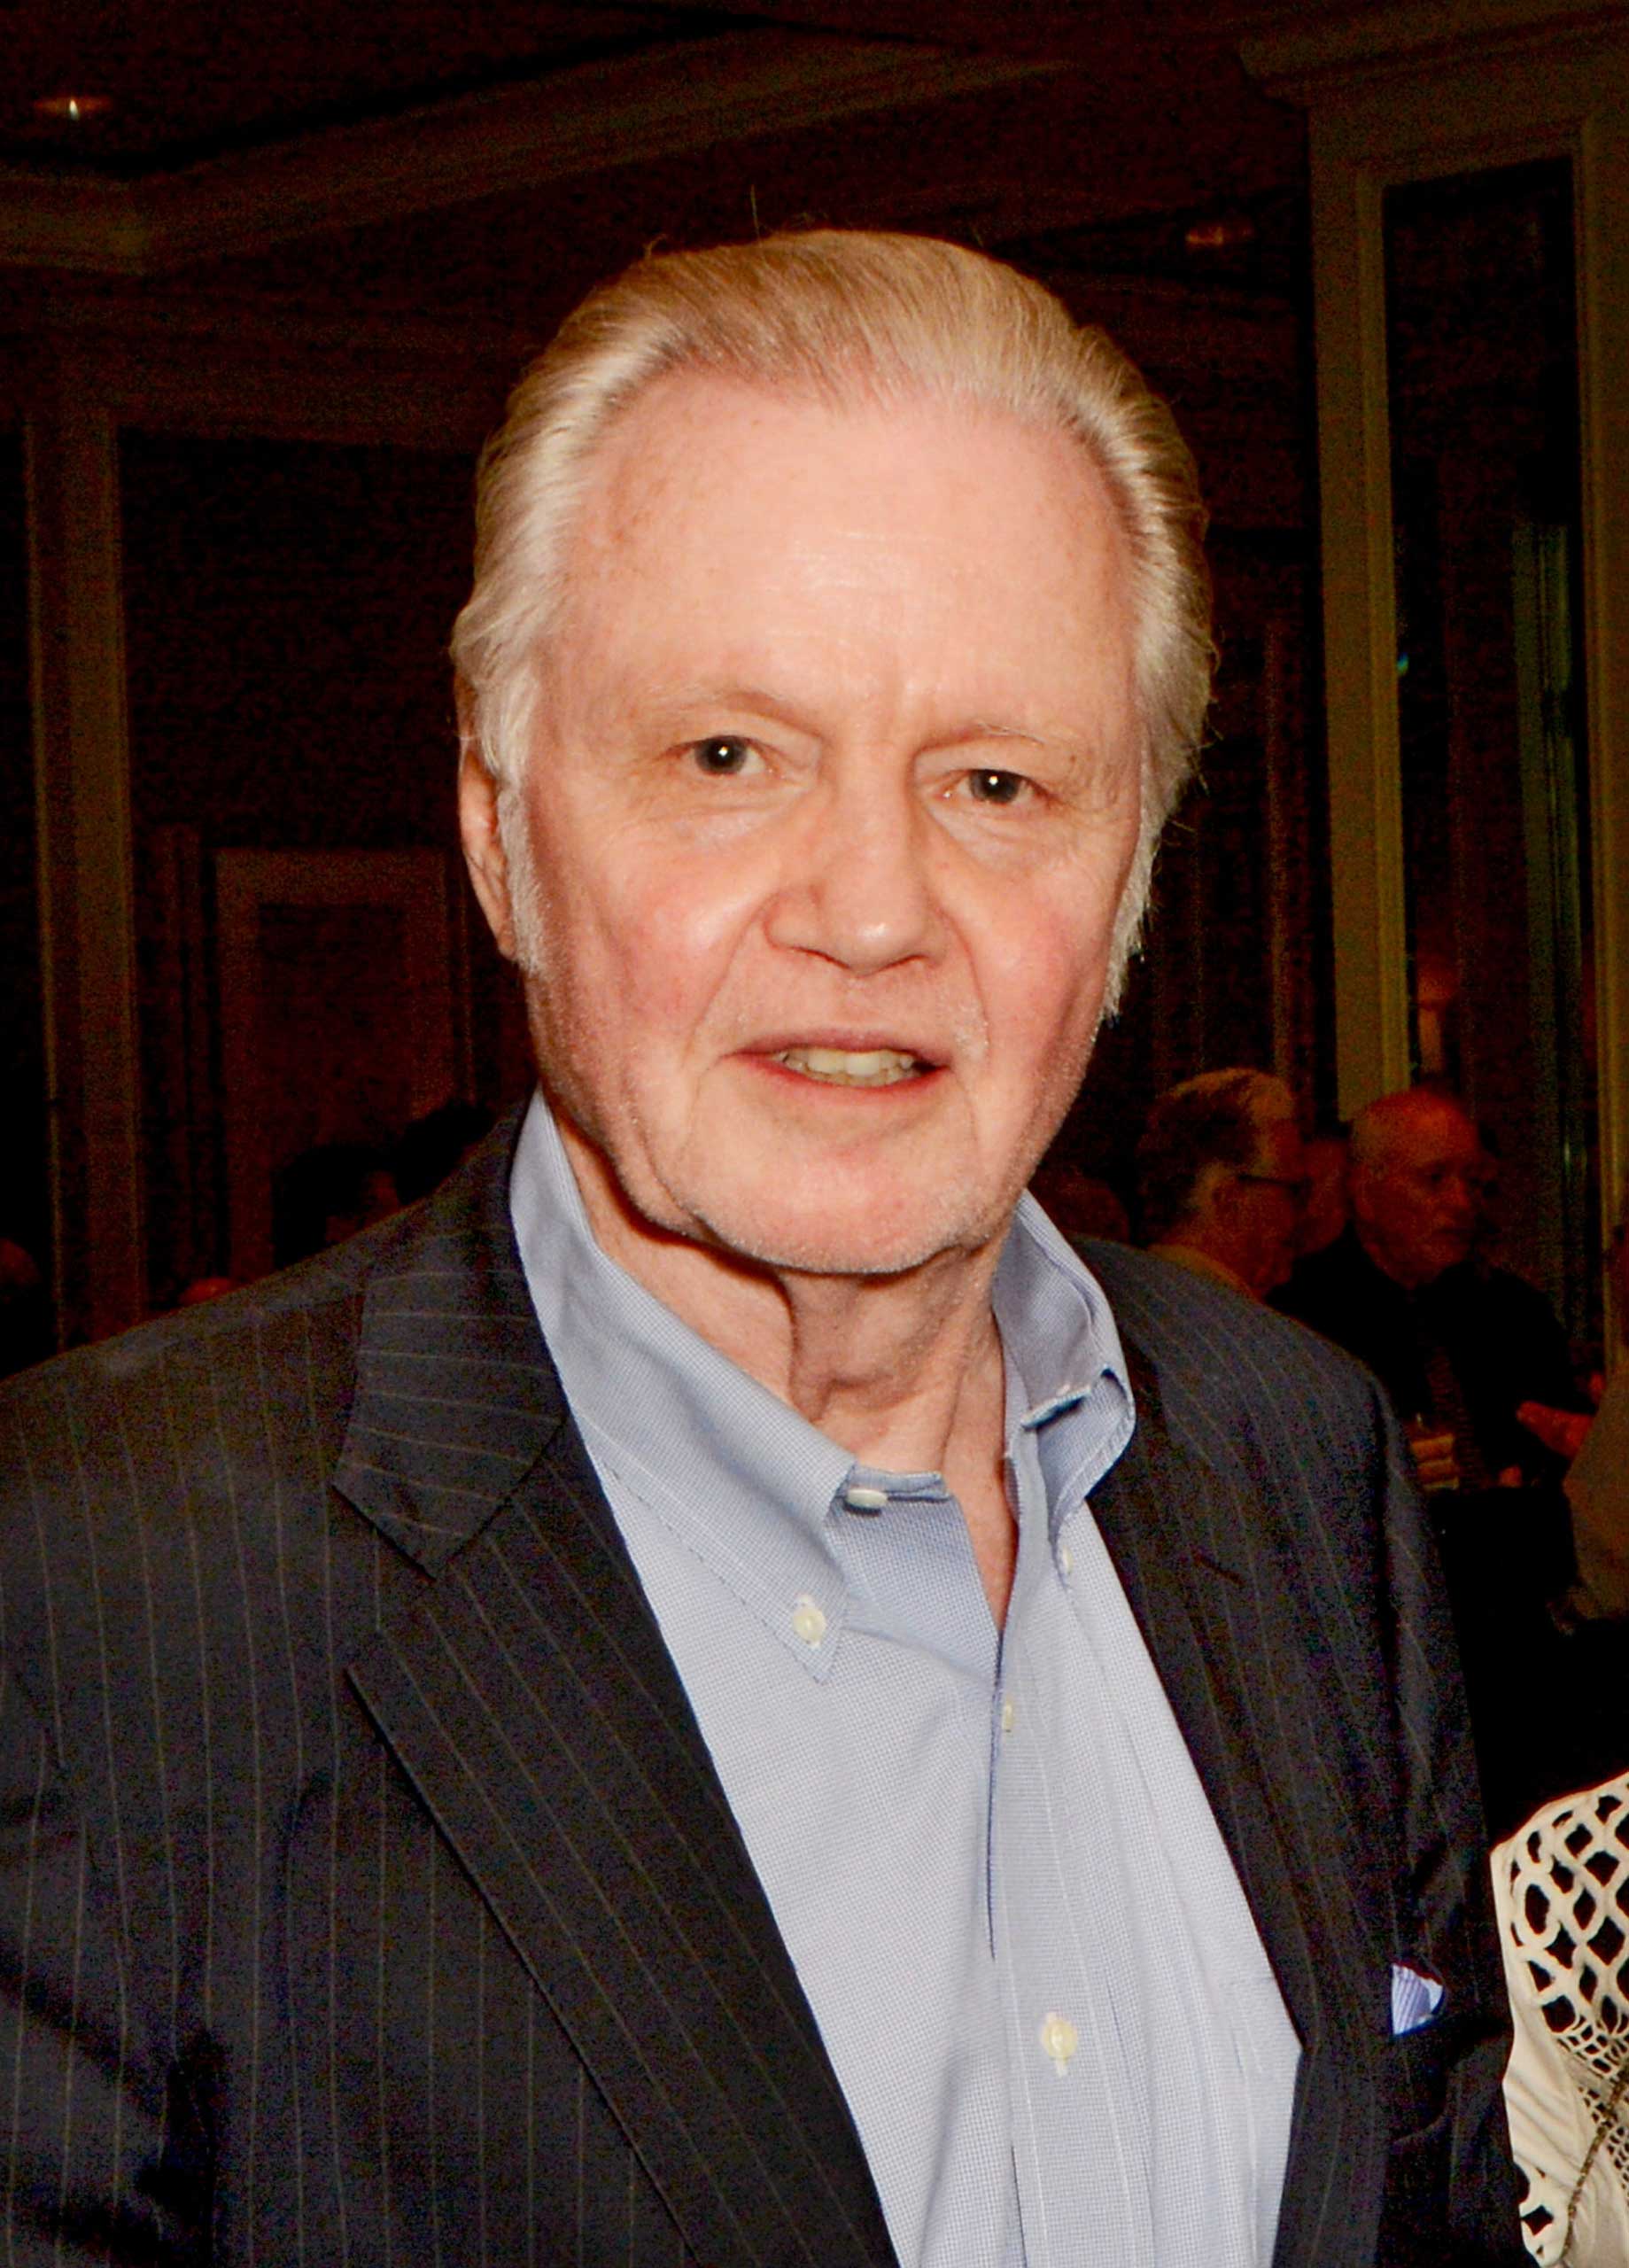 Actor Jon Voight attends The Salute to Hollywood Gala: Unite for Remembrance presented by The American Society for Yad Vashem &amp; Jewish Life Foundation at the Four Seasons Hotel Los Angeles in Beverly Hills, on June 28, 2015. (David A. Walega—Getty Images)